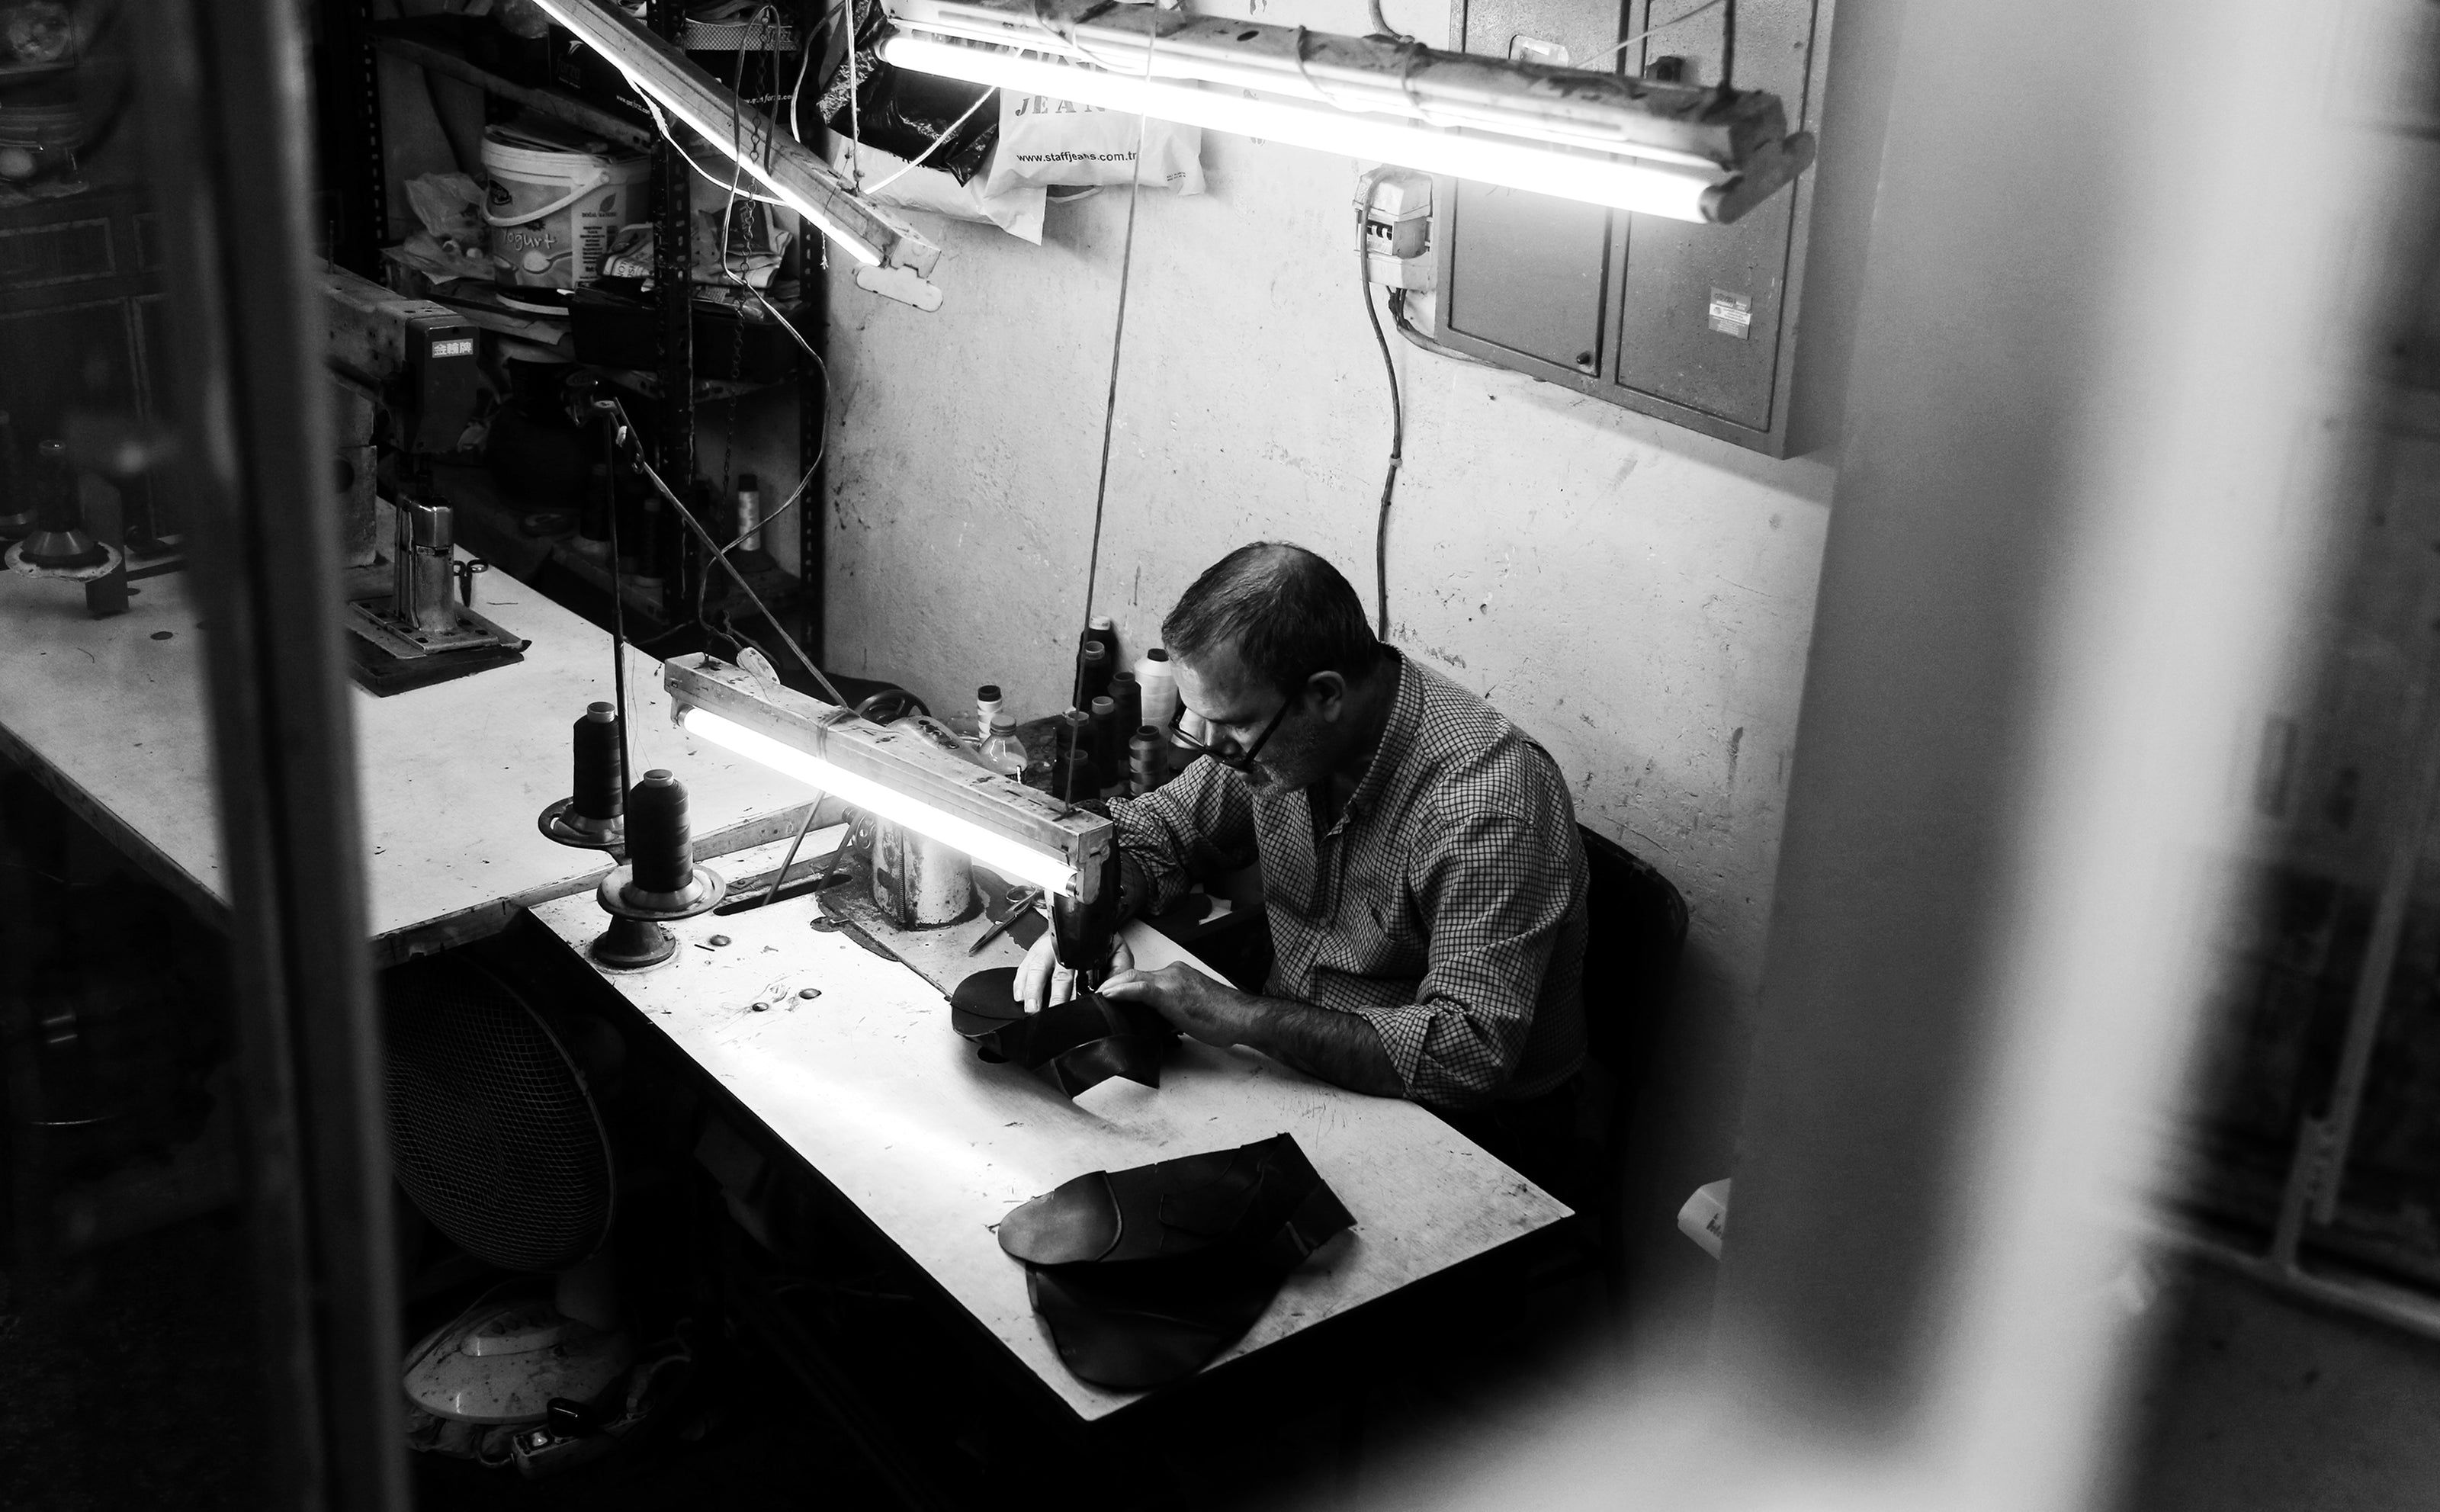 black-and-white-photo-of-a-person-sitting-by-sewing-machine